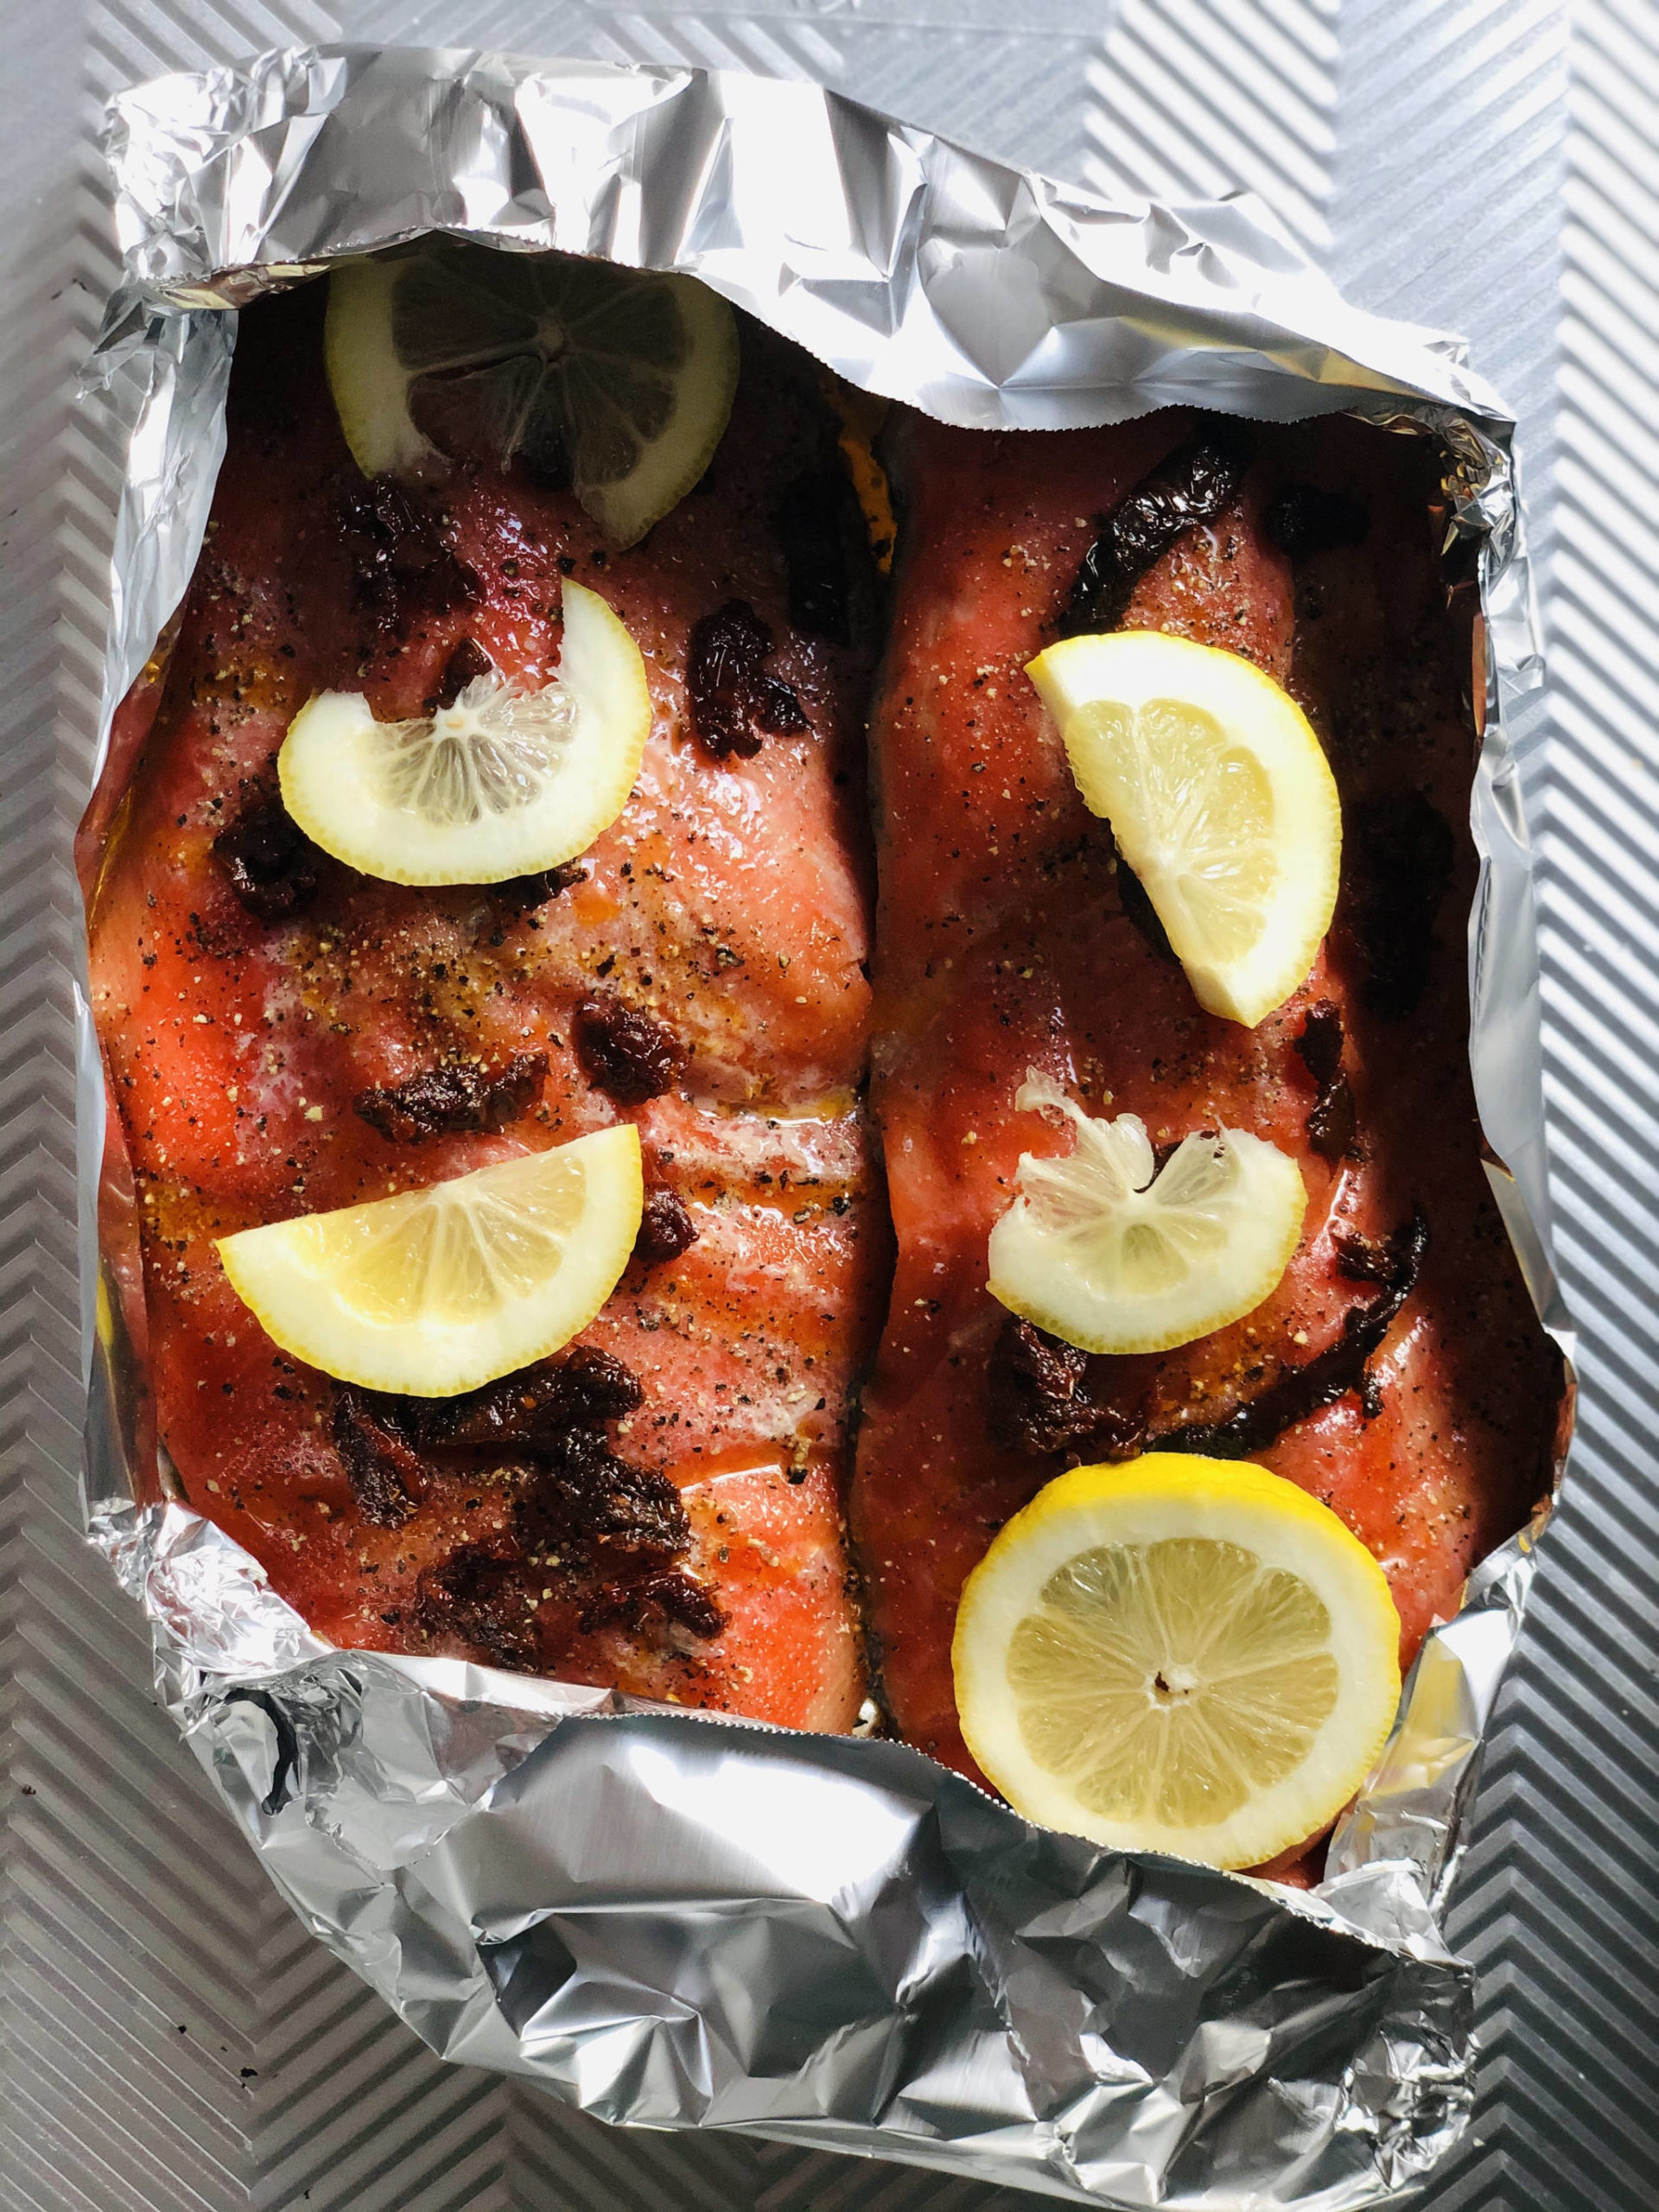 Victoria Petersen/Peninsula Clarion
Salmon dressed up with sun-dried tomatoes and lemons is ready to go in the oven.